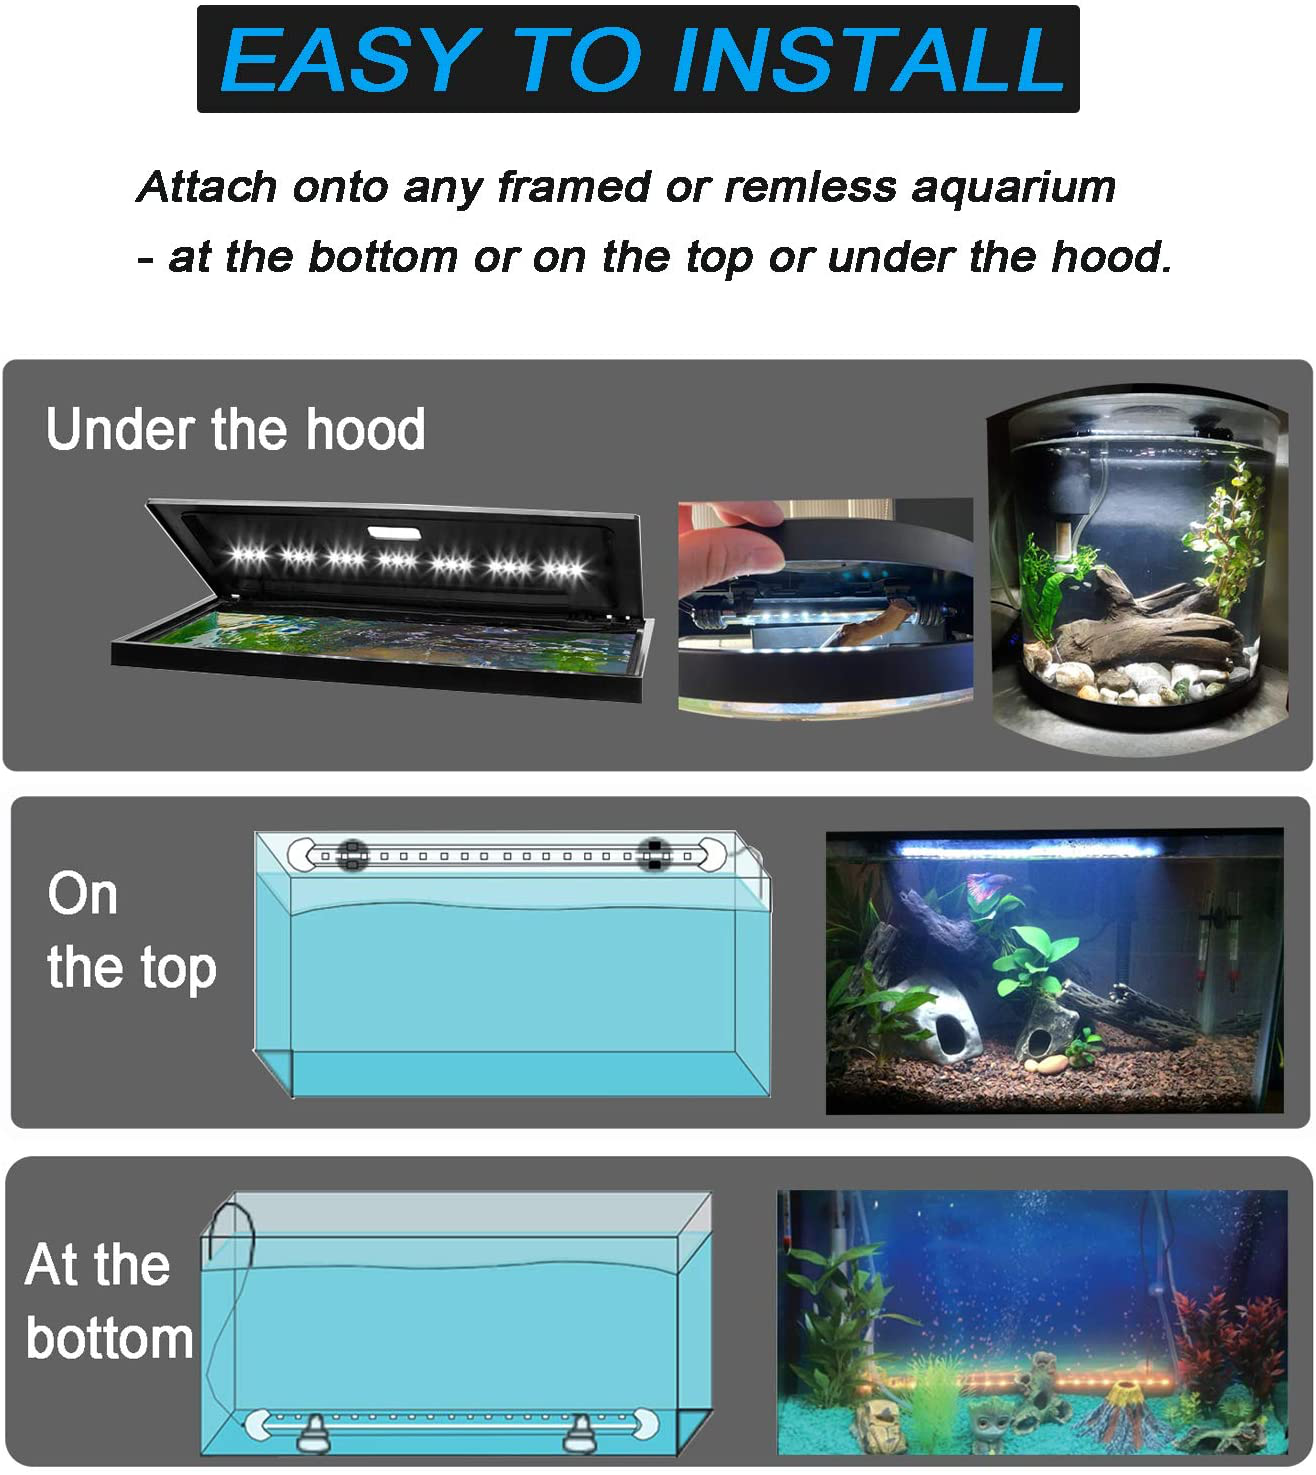 Mingdak 24/7 Submersible Aquarium Light for Fish Tank,Auto Turn On/Off Day/Night Cycle,3 Stage Timer for Timing,3 Lighting Mode,True 660Nm RED Leds,Brightness Adjust,39 Leds 15 Inch